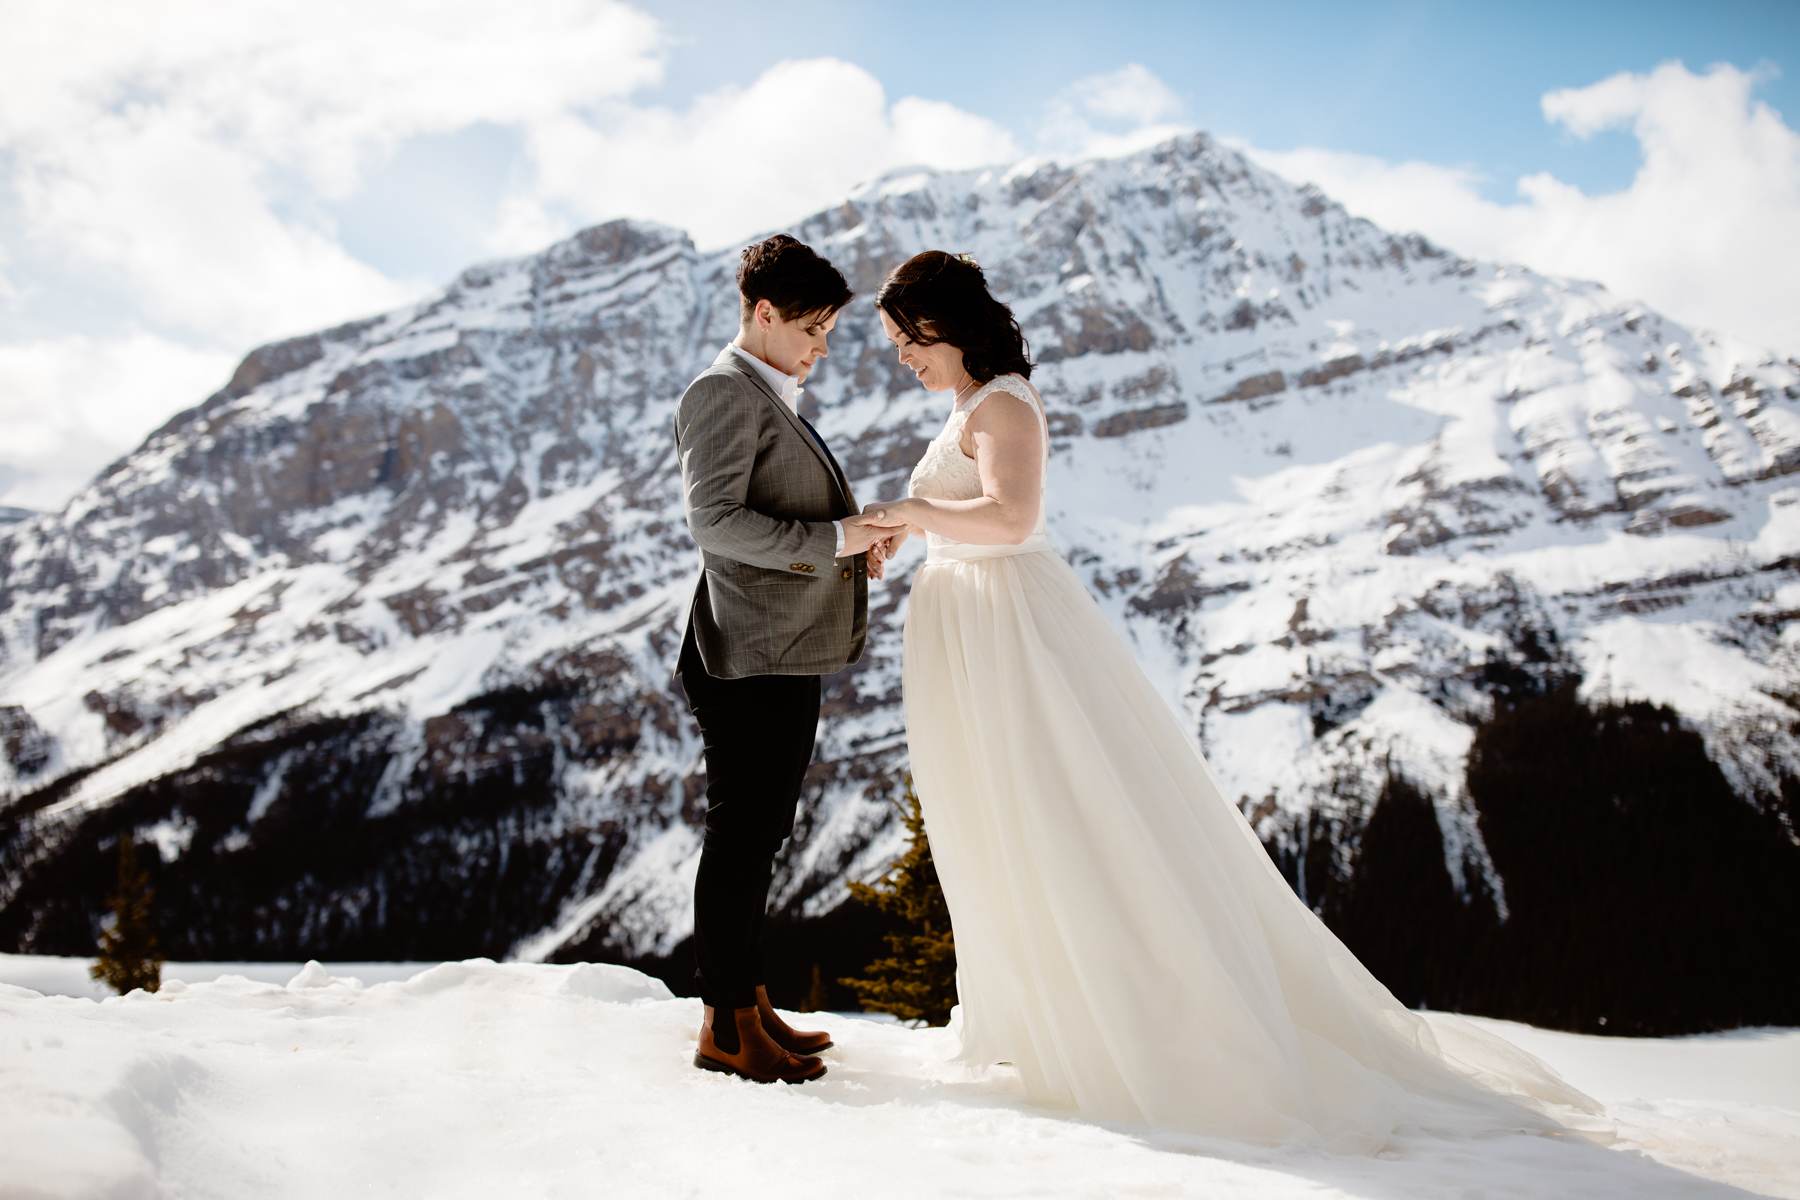 Banff National Park Elopement Photography with LGBTQ-friendly photographers - Image 8